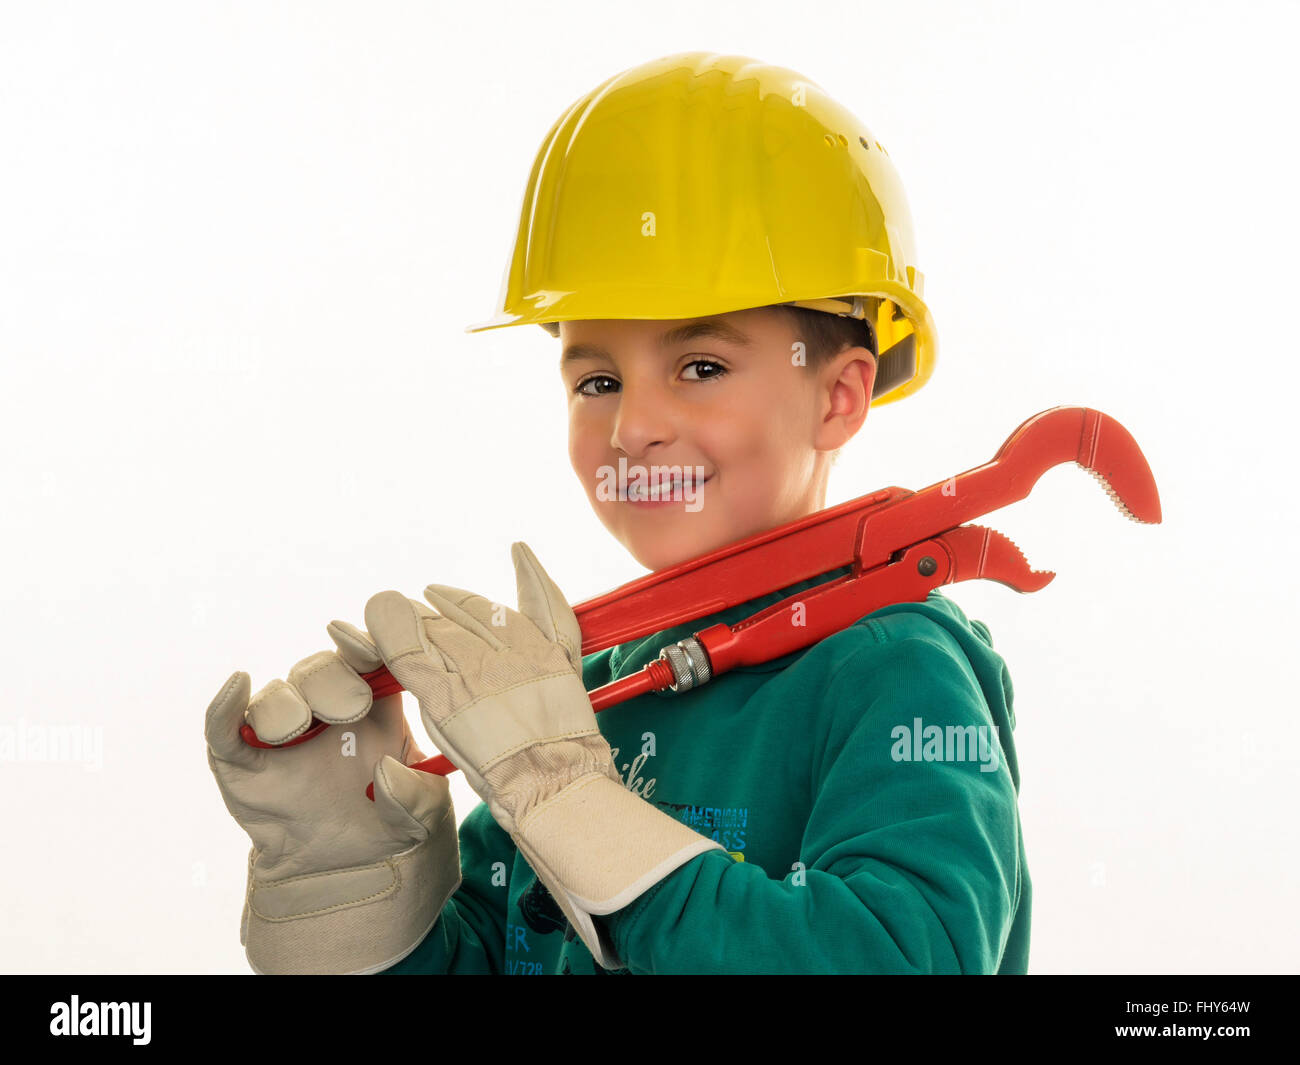 Portrait of boy with hard hat holding large pliers Stock Photo